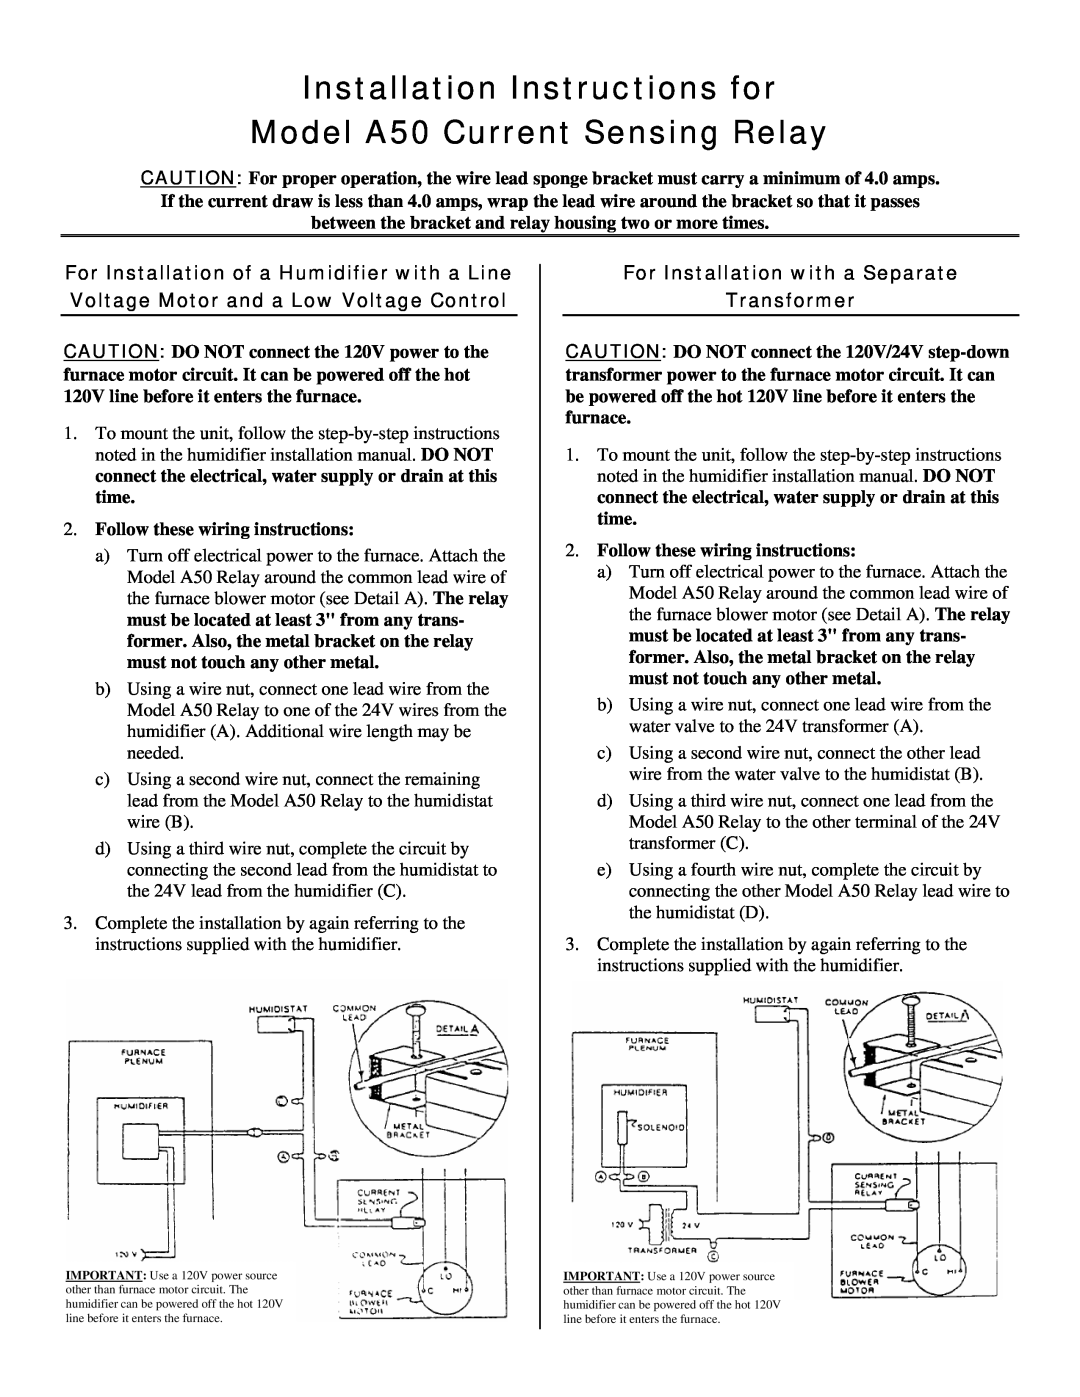 Skuttle Indoor Air Quality Products Installation Instructions for Model A50 Current Sensing Relay 